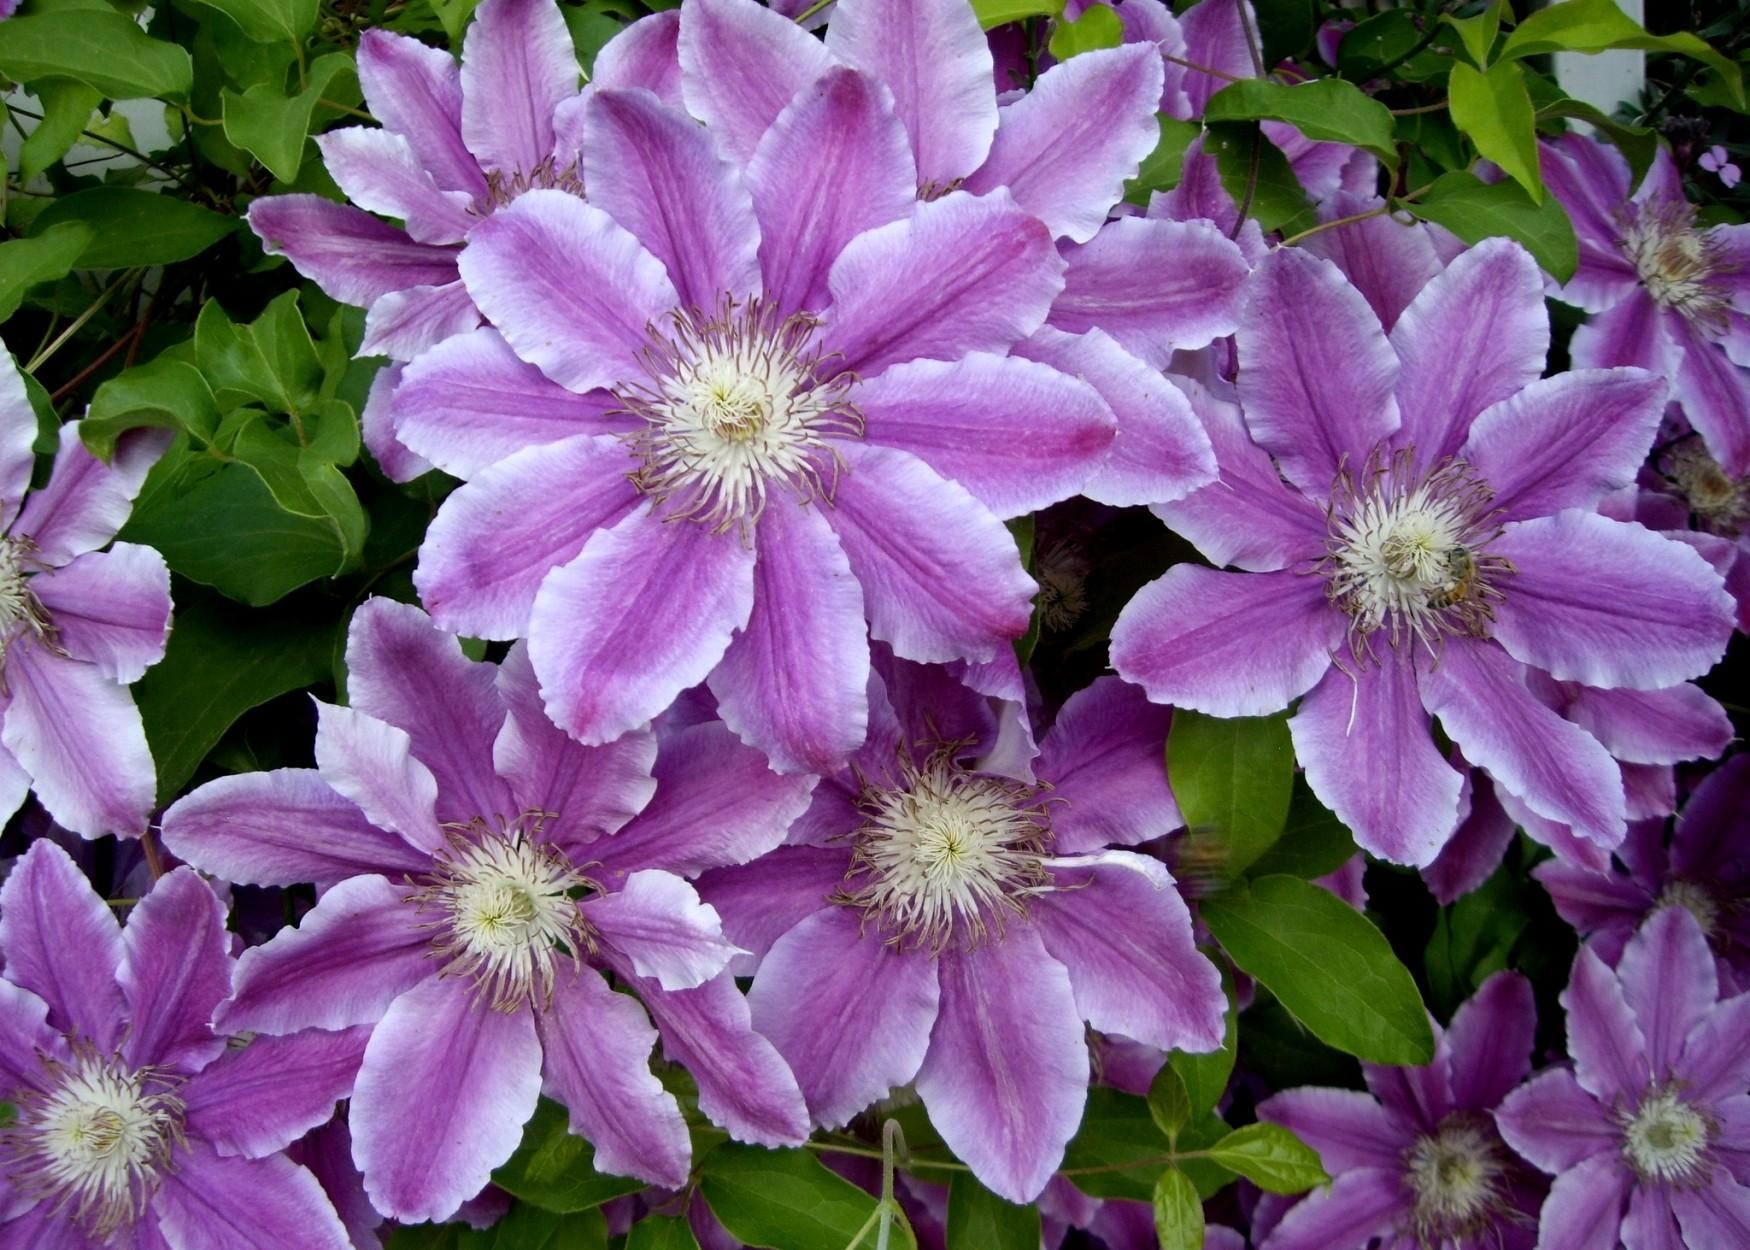 close up, earth, clematis, flower, nature, purple flower, flowers